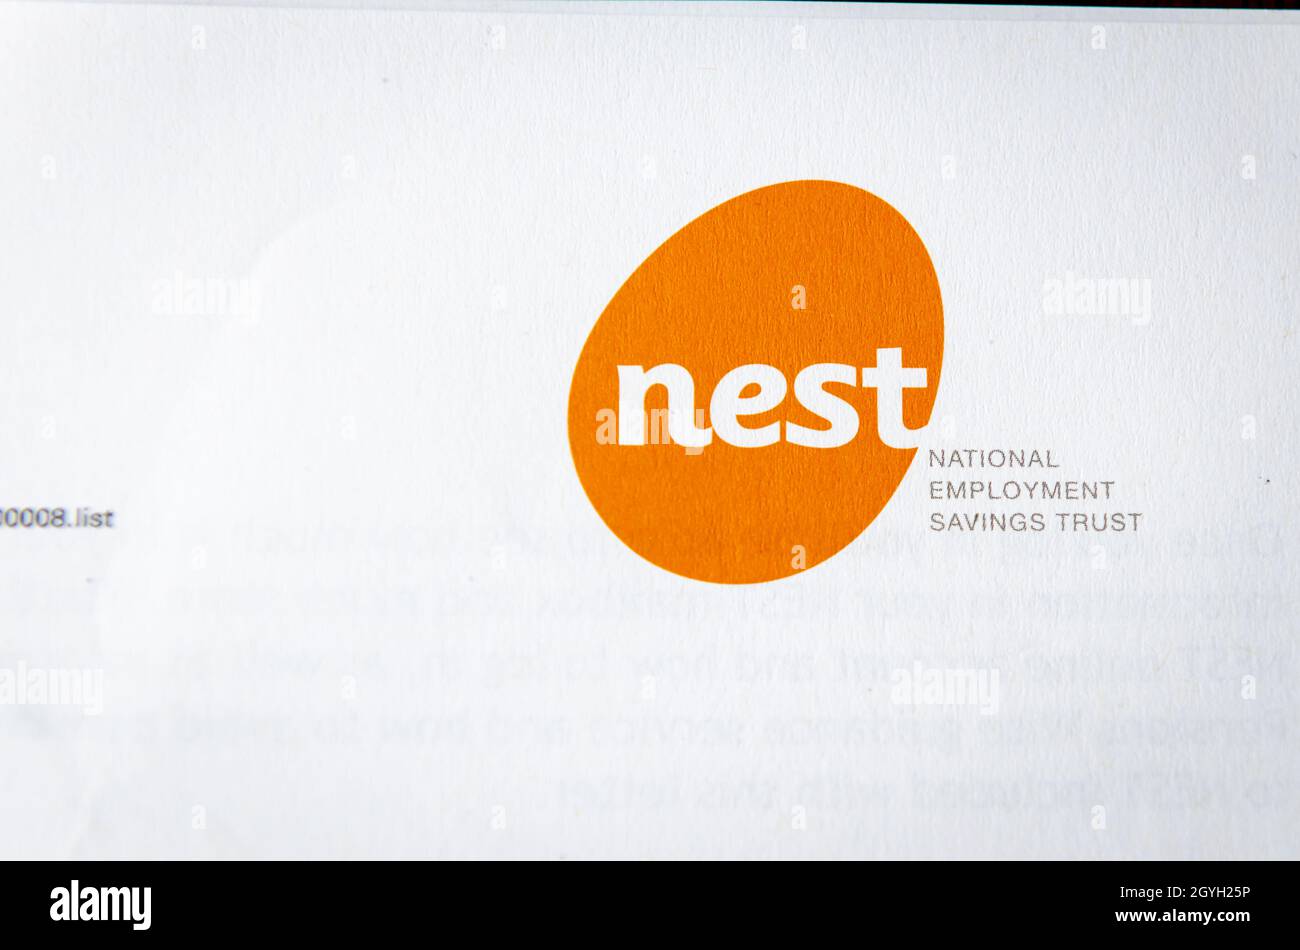 The government sponsored Nest work pension provider where employees are encouraged to contribute an amount of earning to provide for retirement. Stock Photo